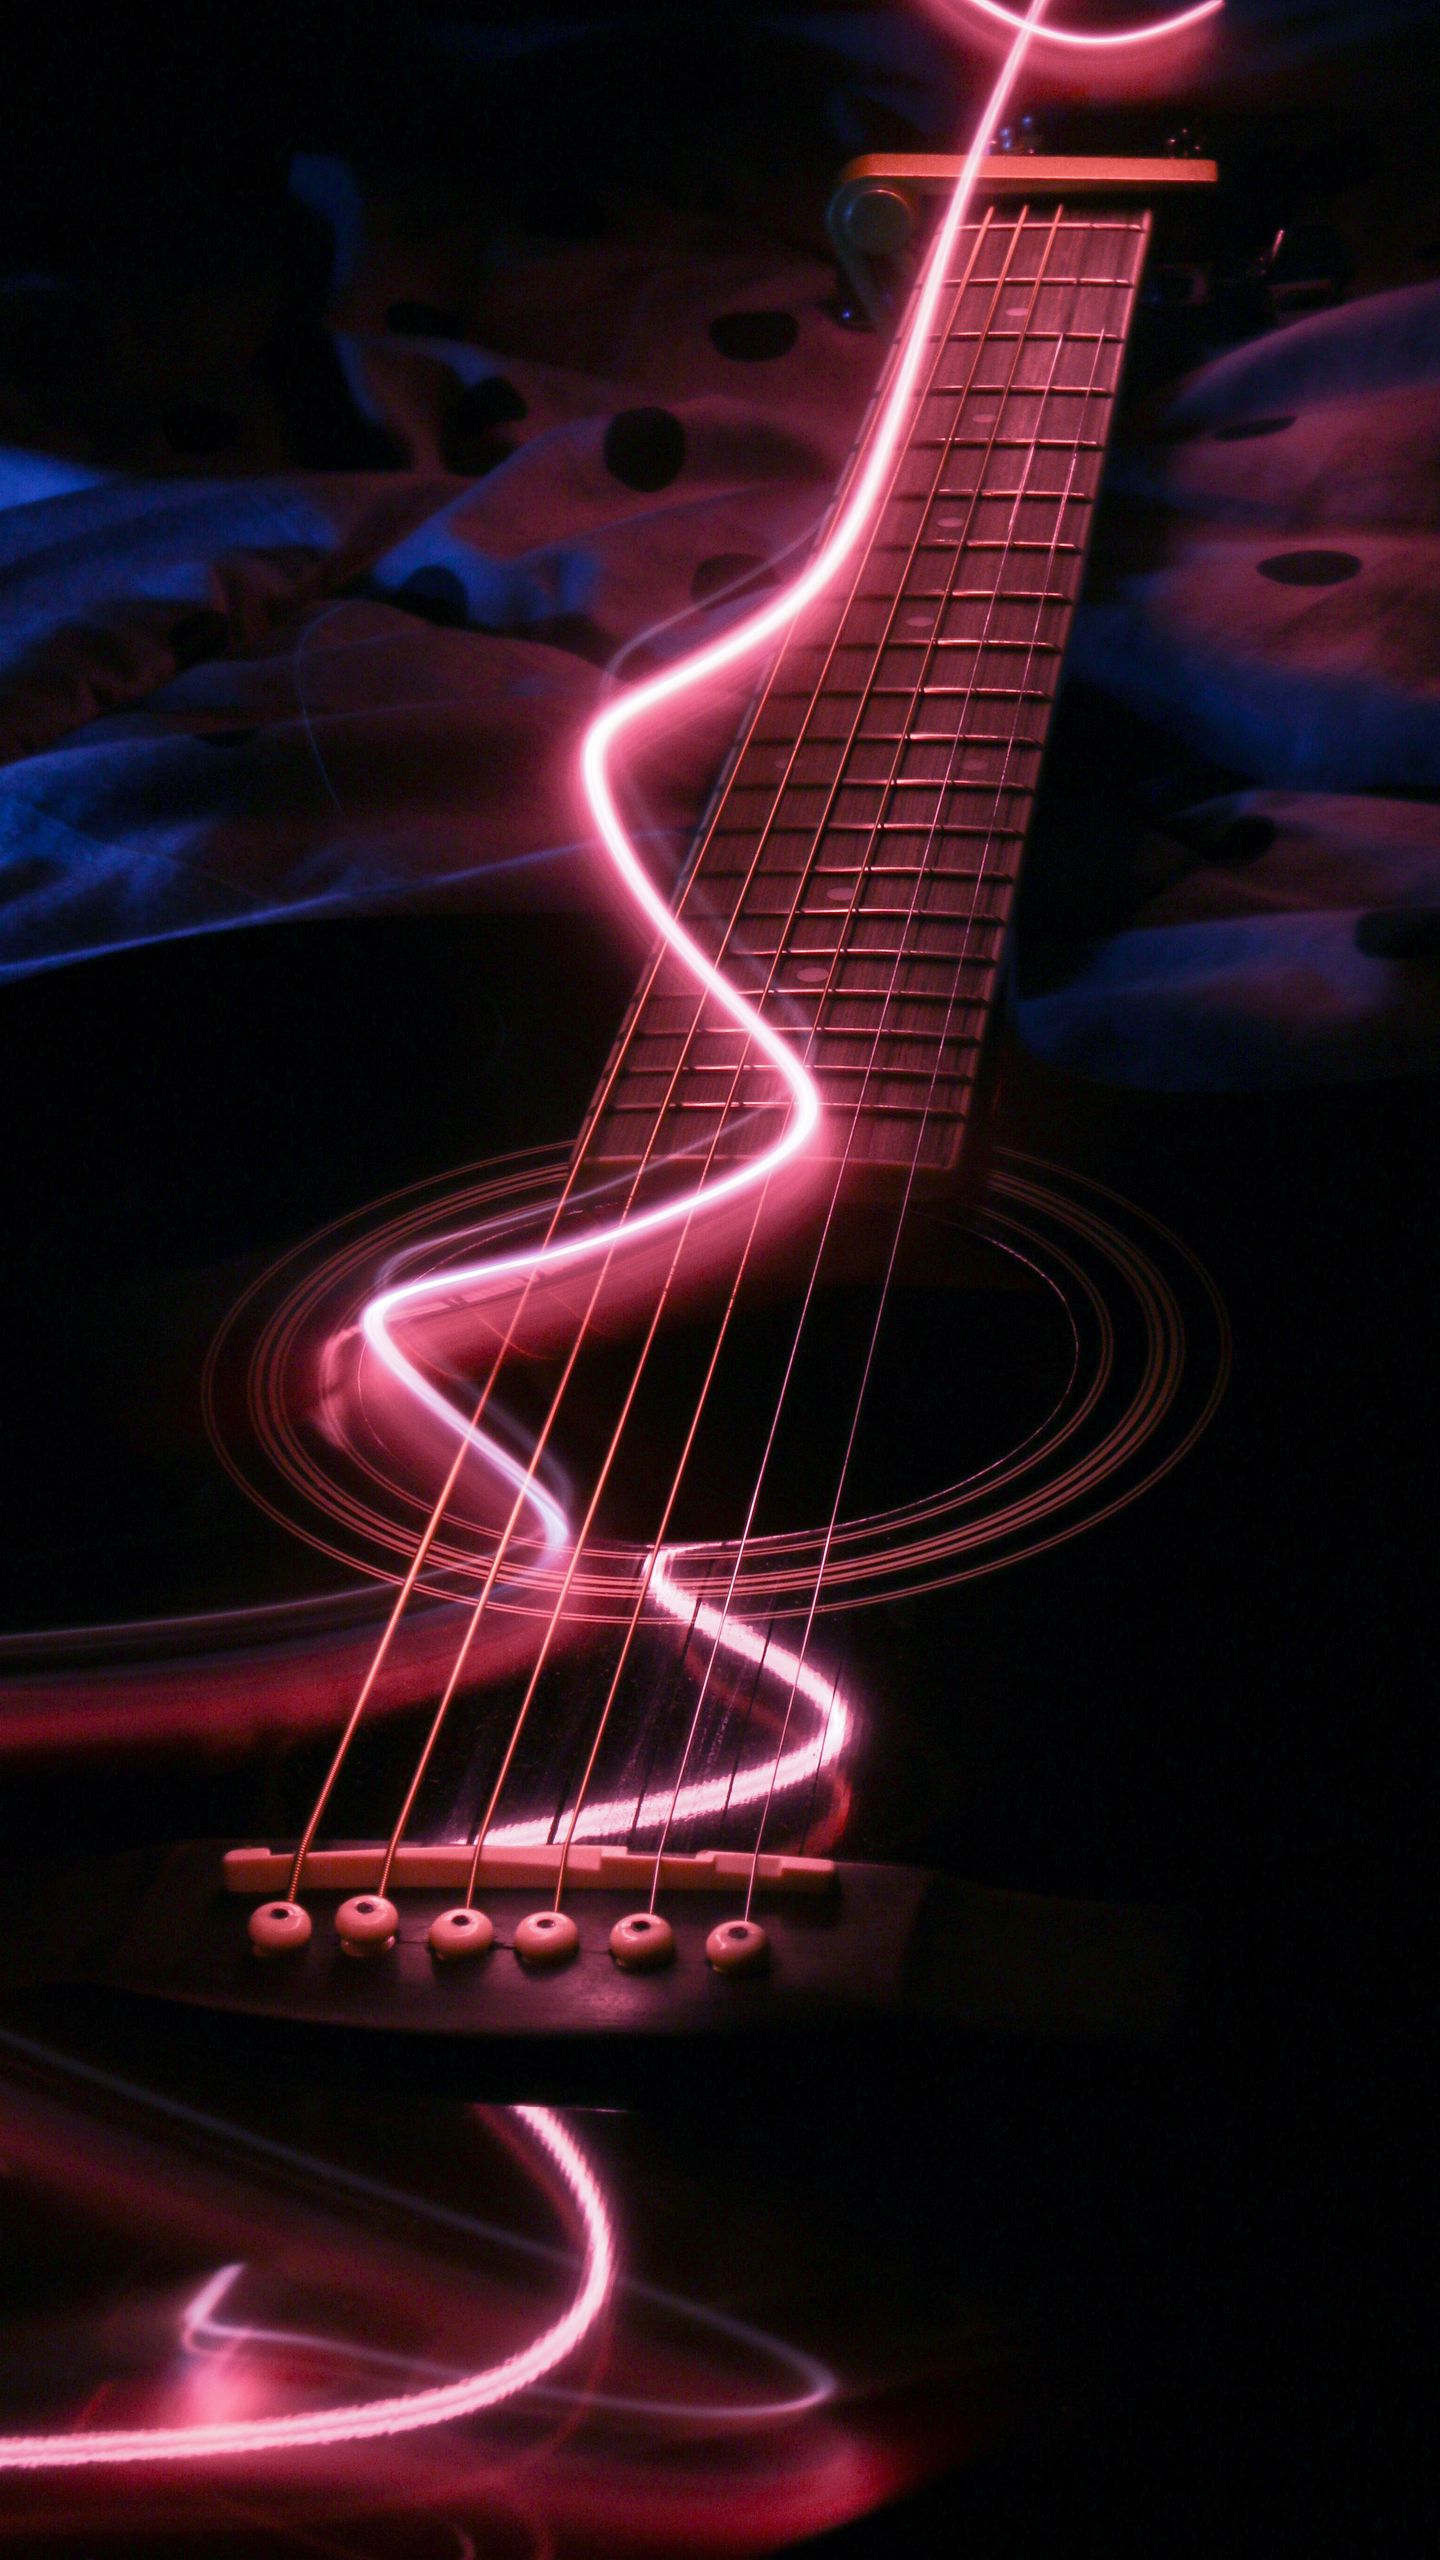 Download wallpaper 1440x2560 guitar, musical instrument, neon, backlight qhd samsung galaxy s s edge, note, lg g4 HD background